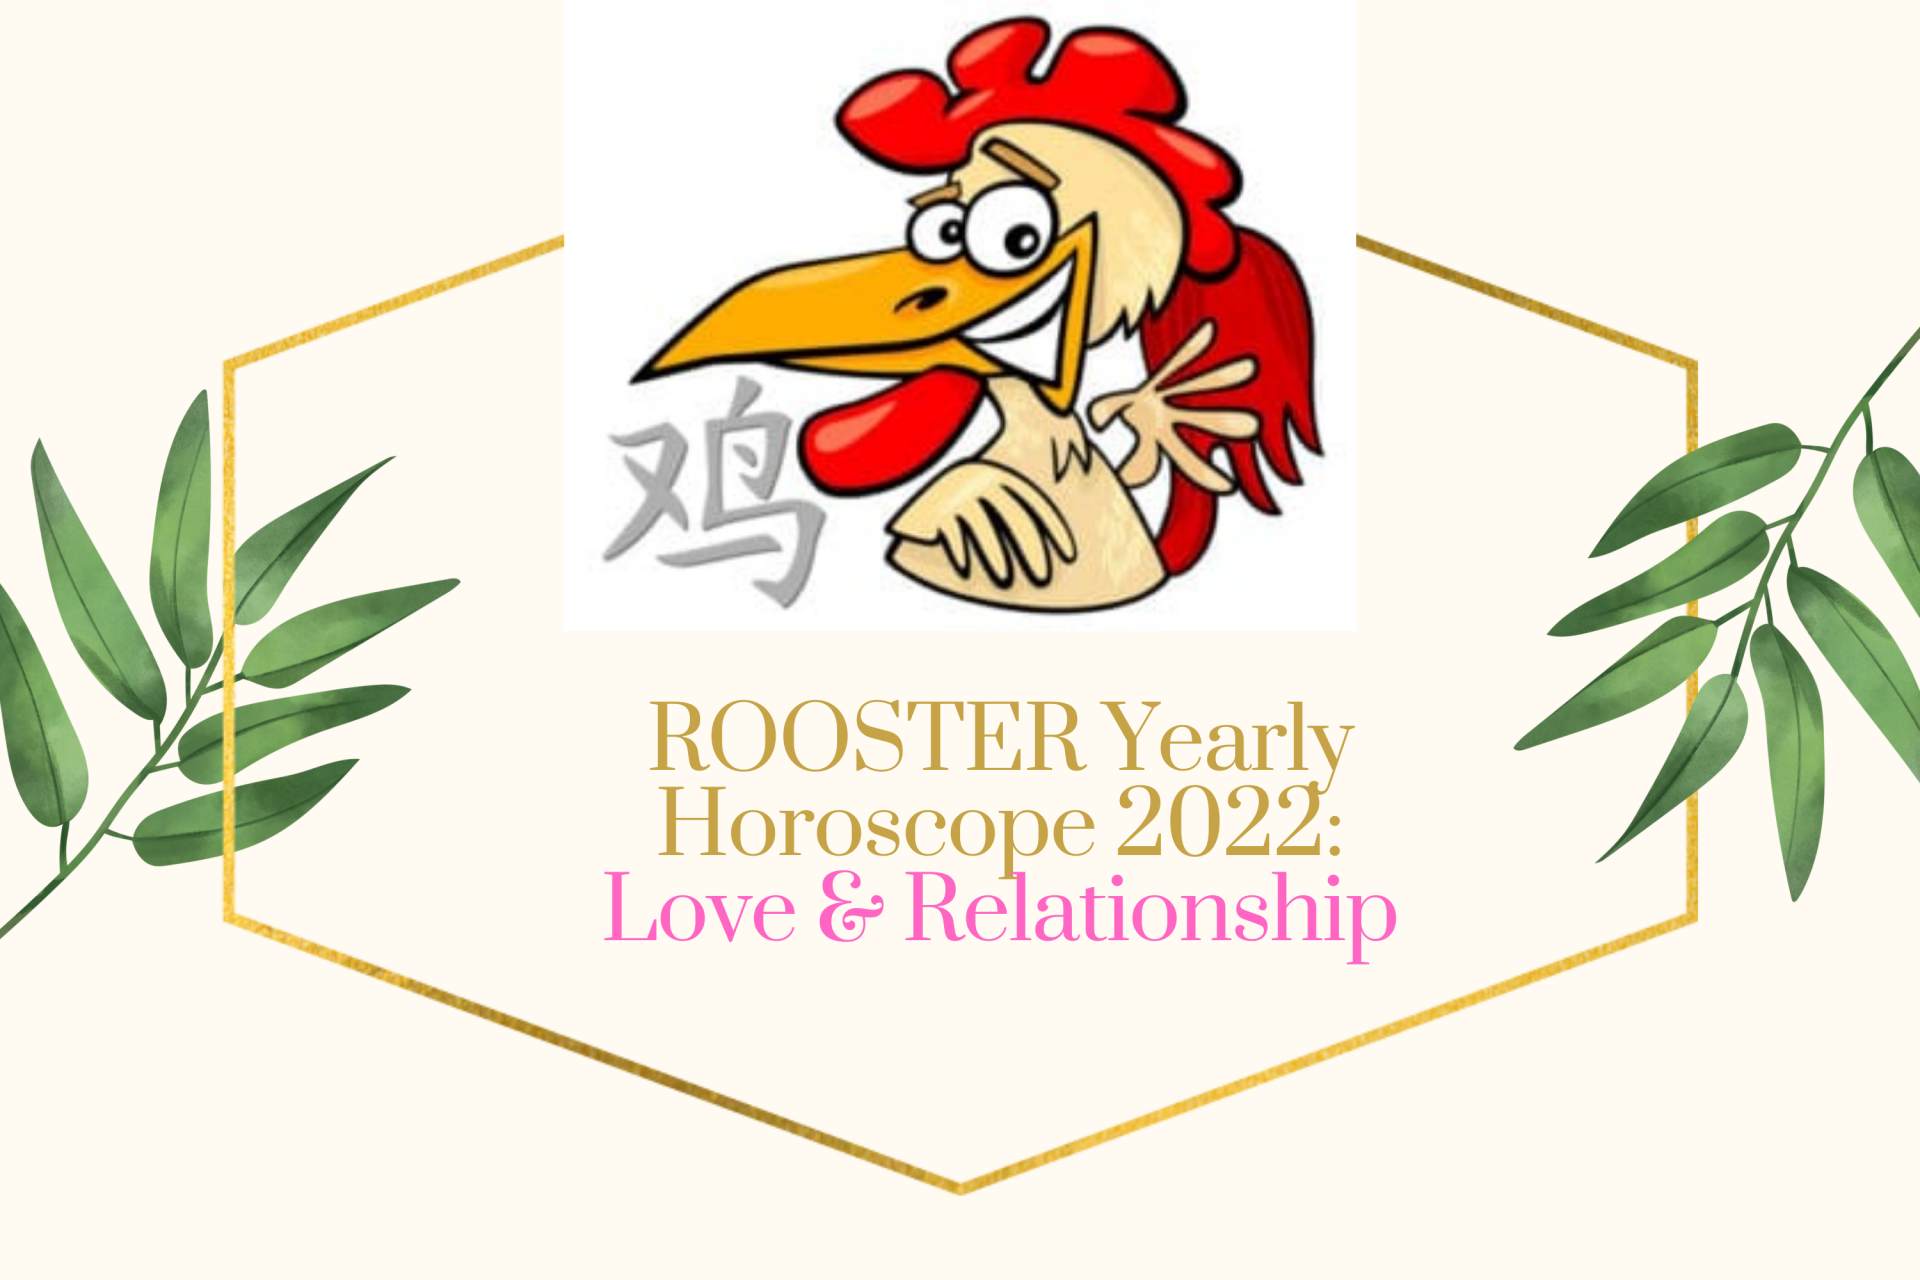 Rooster Yearly Horoscope 2022 For Love & Relationship. Photo: KnowInsiders